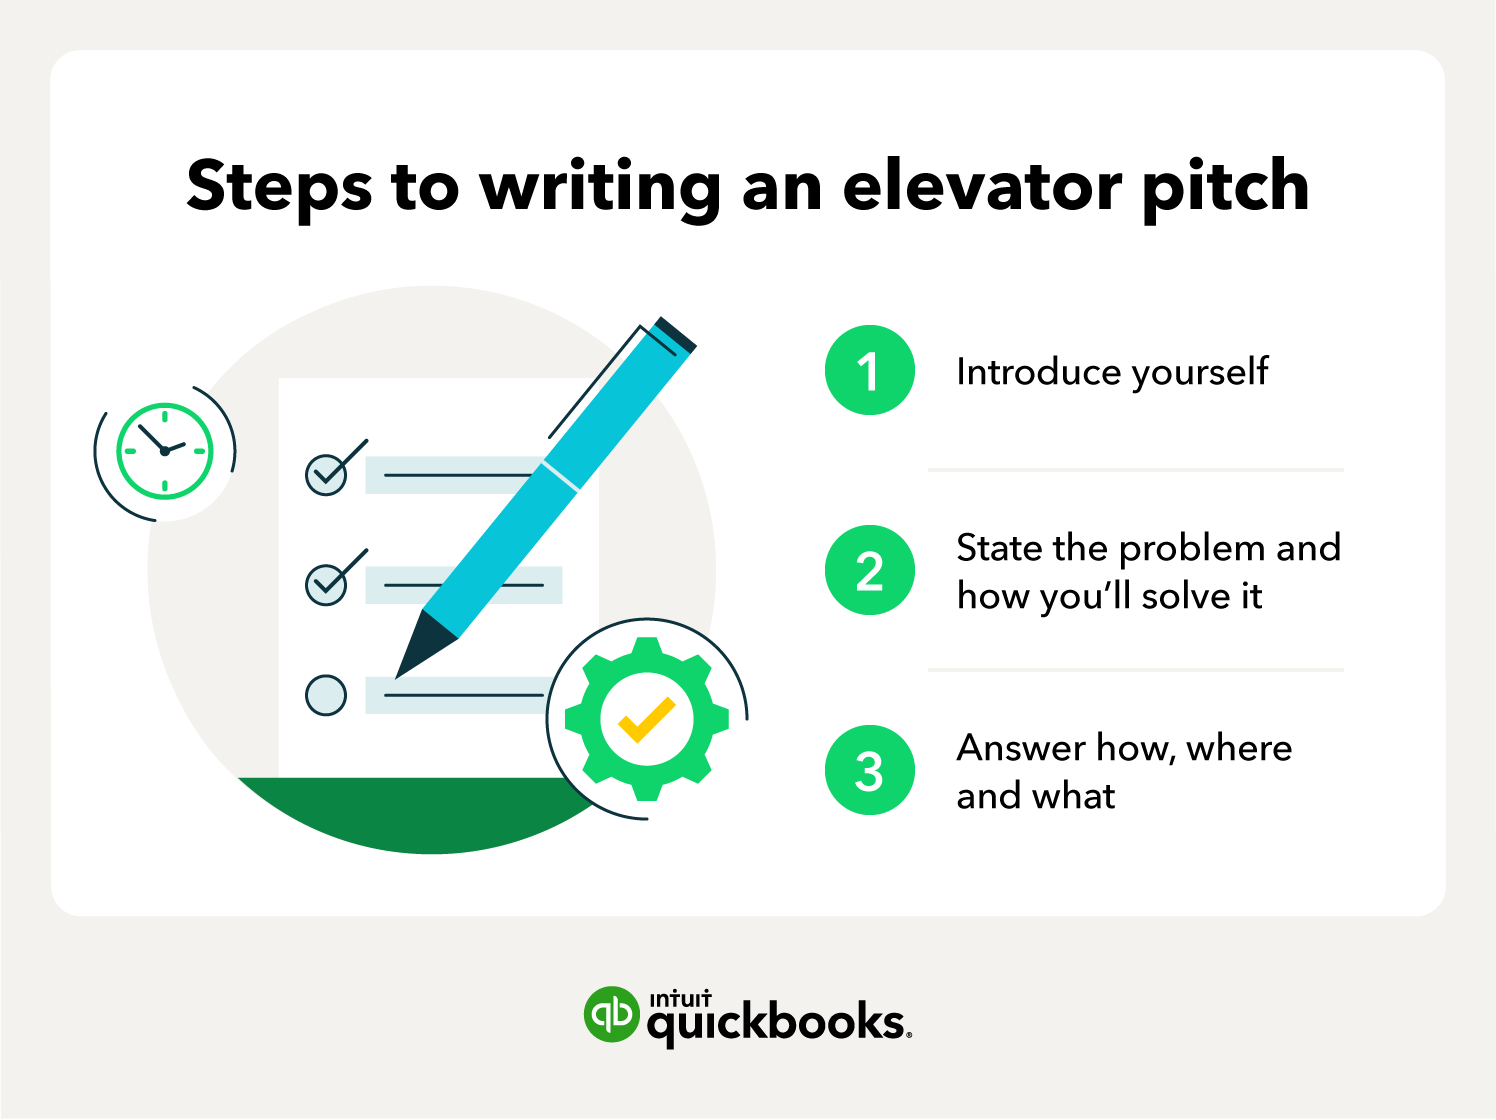 Steps to writing an elevator pitch